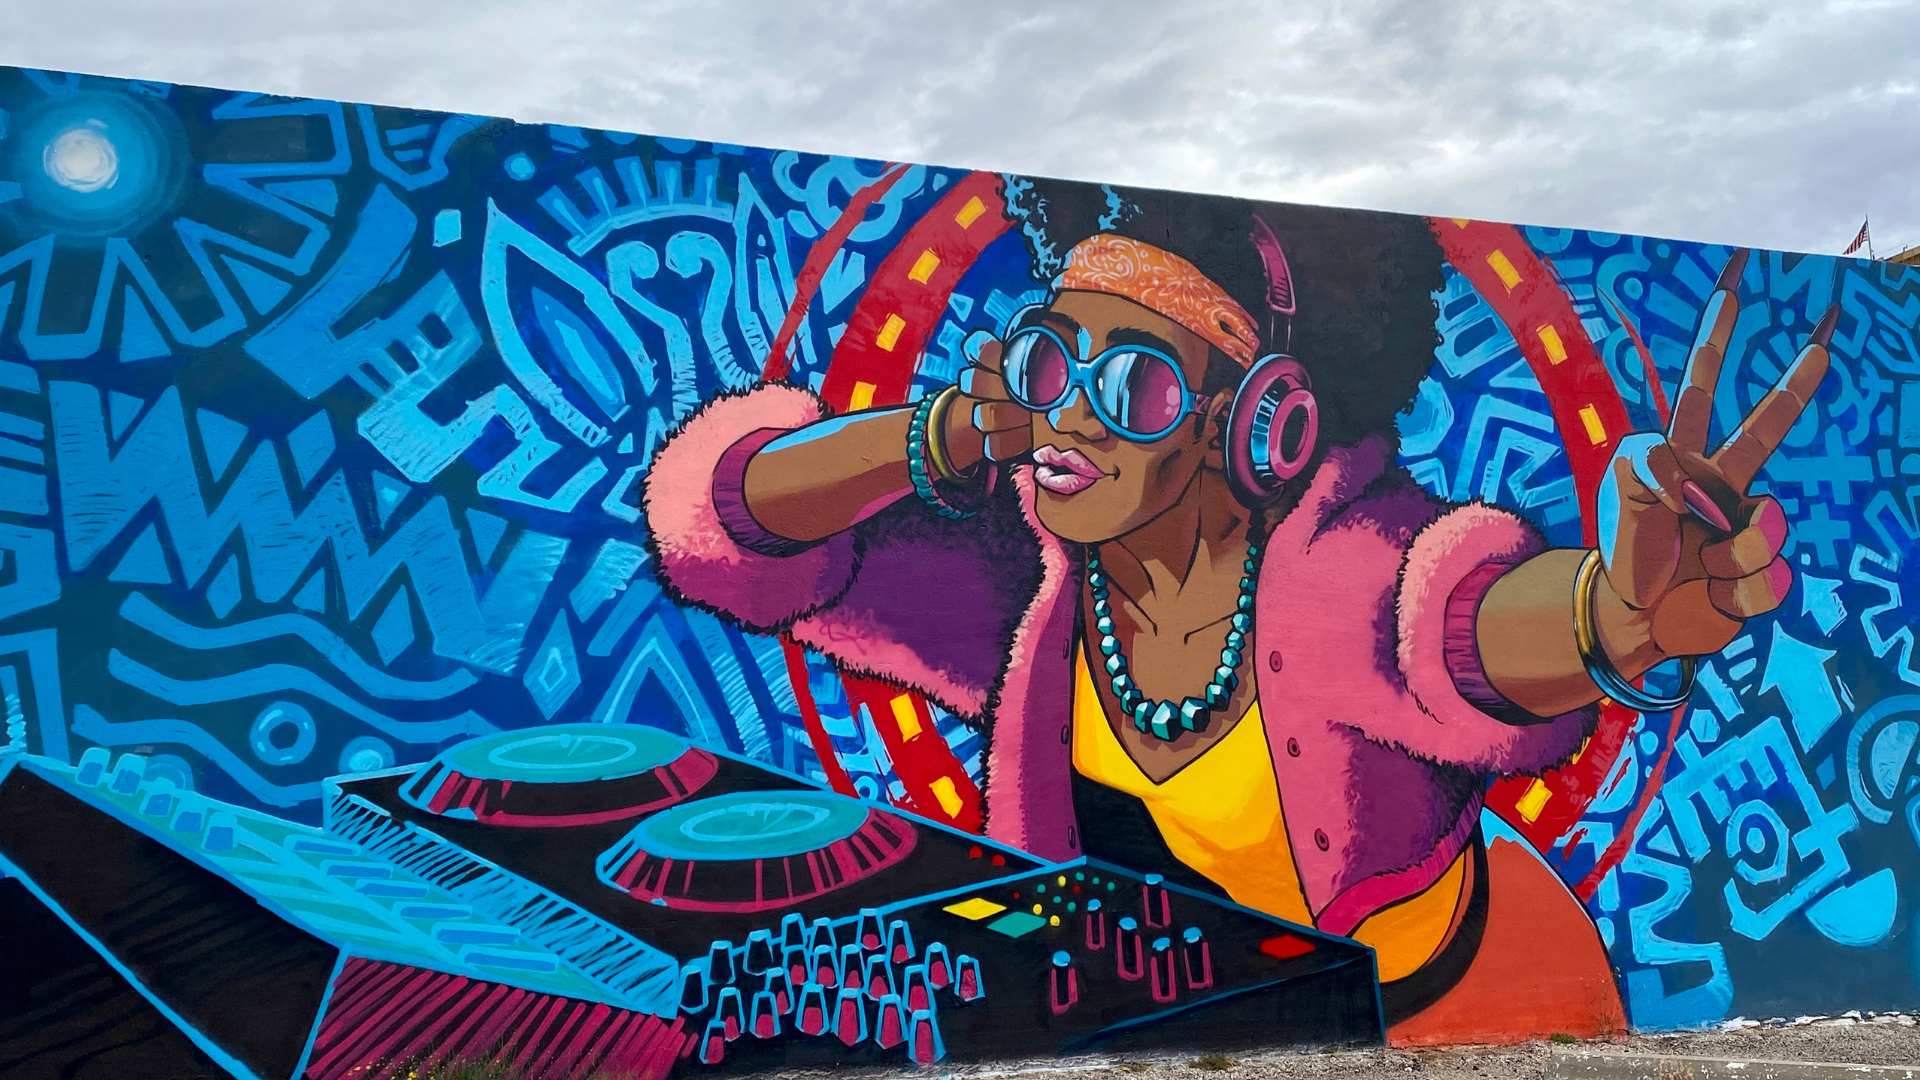 Bespectacled Mural By Dan Thompson in Odessa, TX